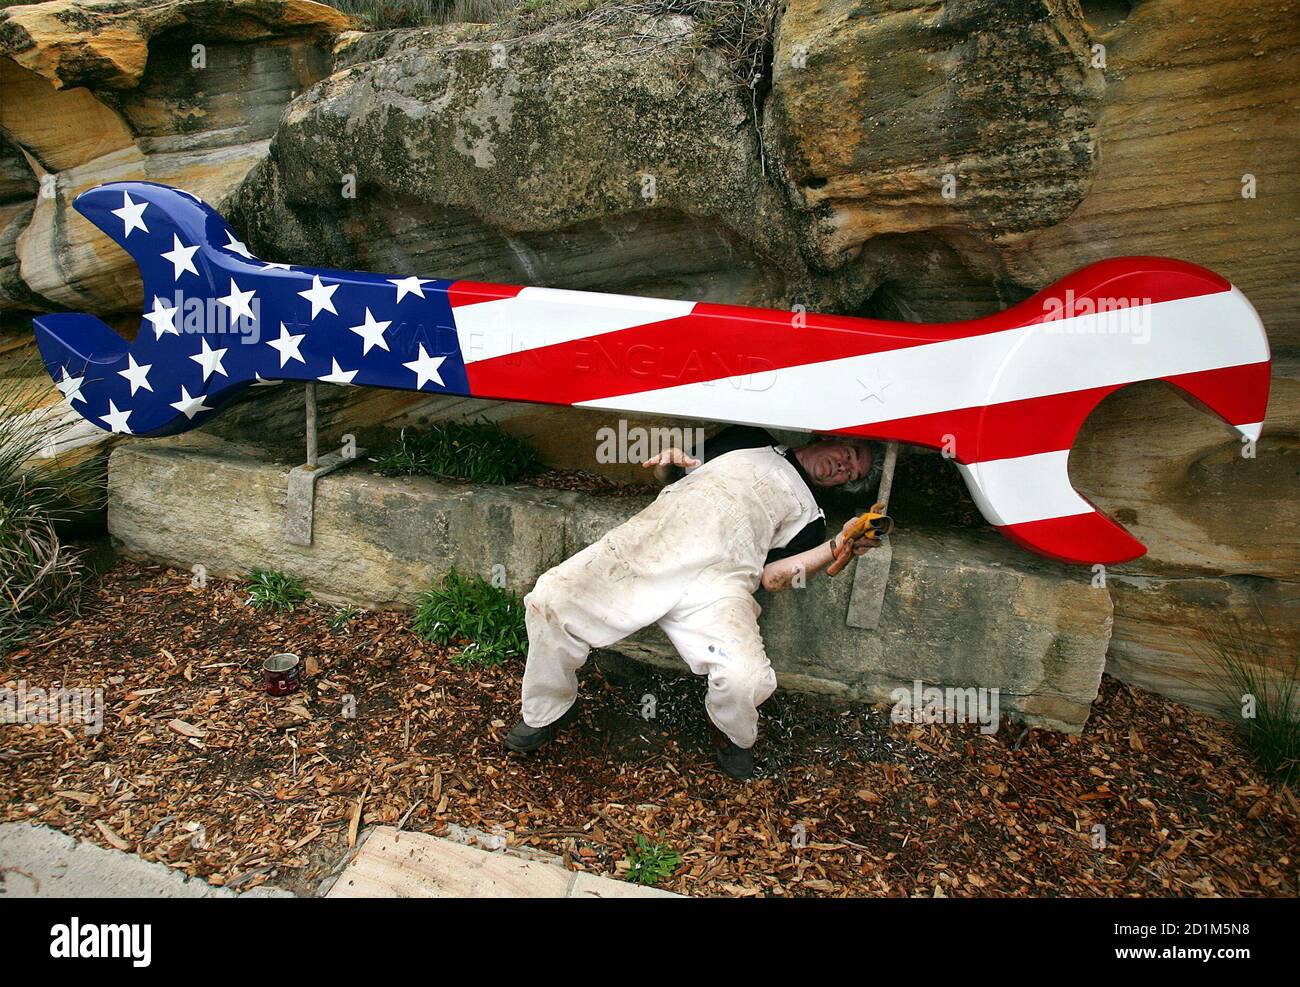 Artist Peter Adams eases out from underneath his artwork called 'A Star Bangled Spanner" after installing it on a cliff near Bondi Beach in Sydney Novembr 1, 2005. Adams says his artwork, made of timber, fibreglass, resin, steel and wood, represents the United States' meddling in world affairs, causing unrest to continue, like a "spanner in the works". The work is one of over over 100 exhibits from Australian and international artists participating in the annual 'Sculpture by the Sea' event which is in its ninth year. Foto de stock